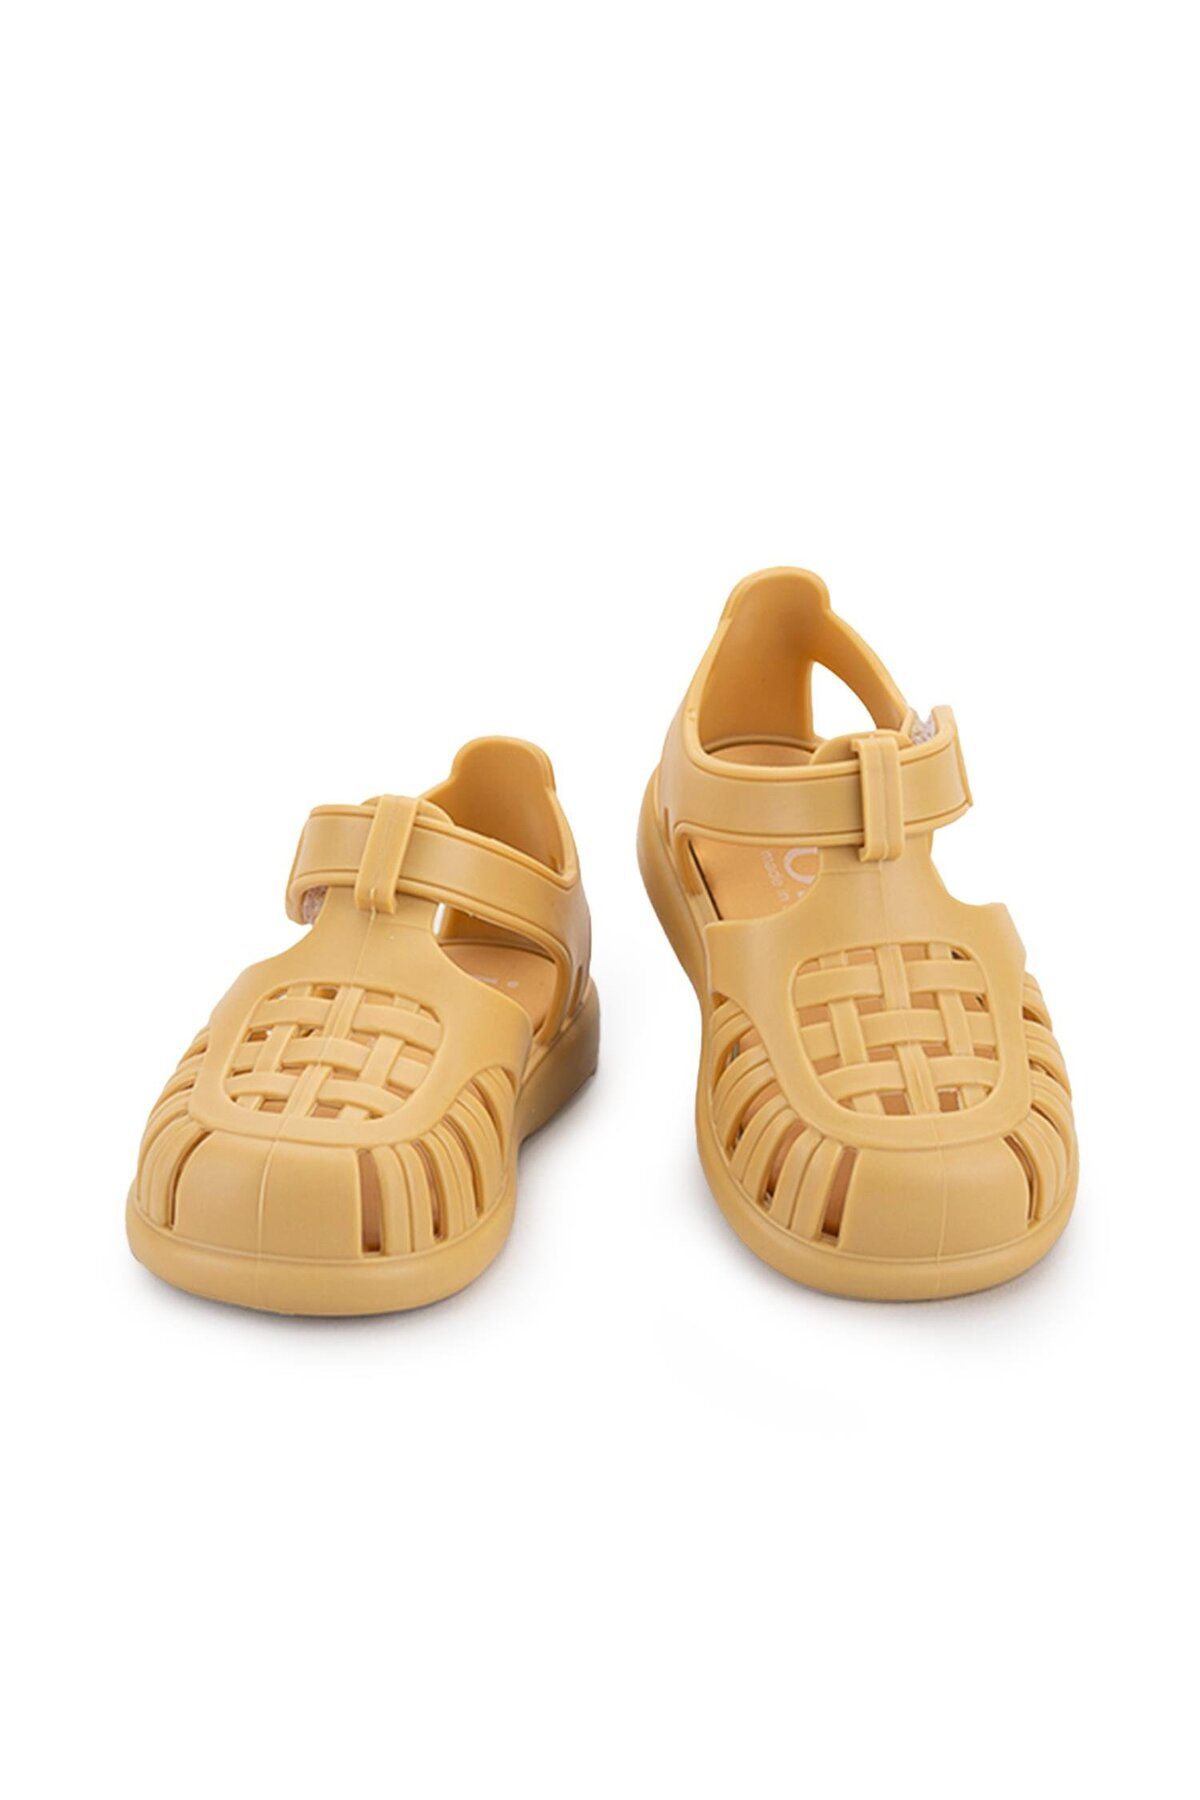 IGOR Sandals Sondals S10271 TOBBY SOLID